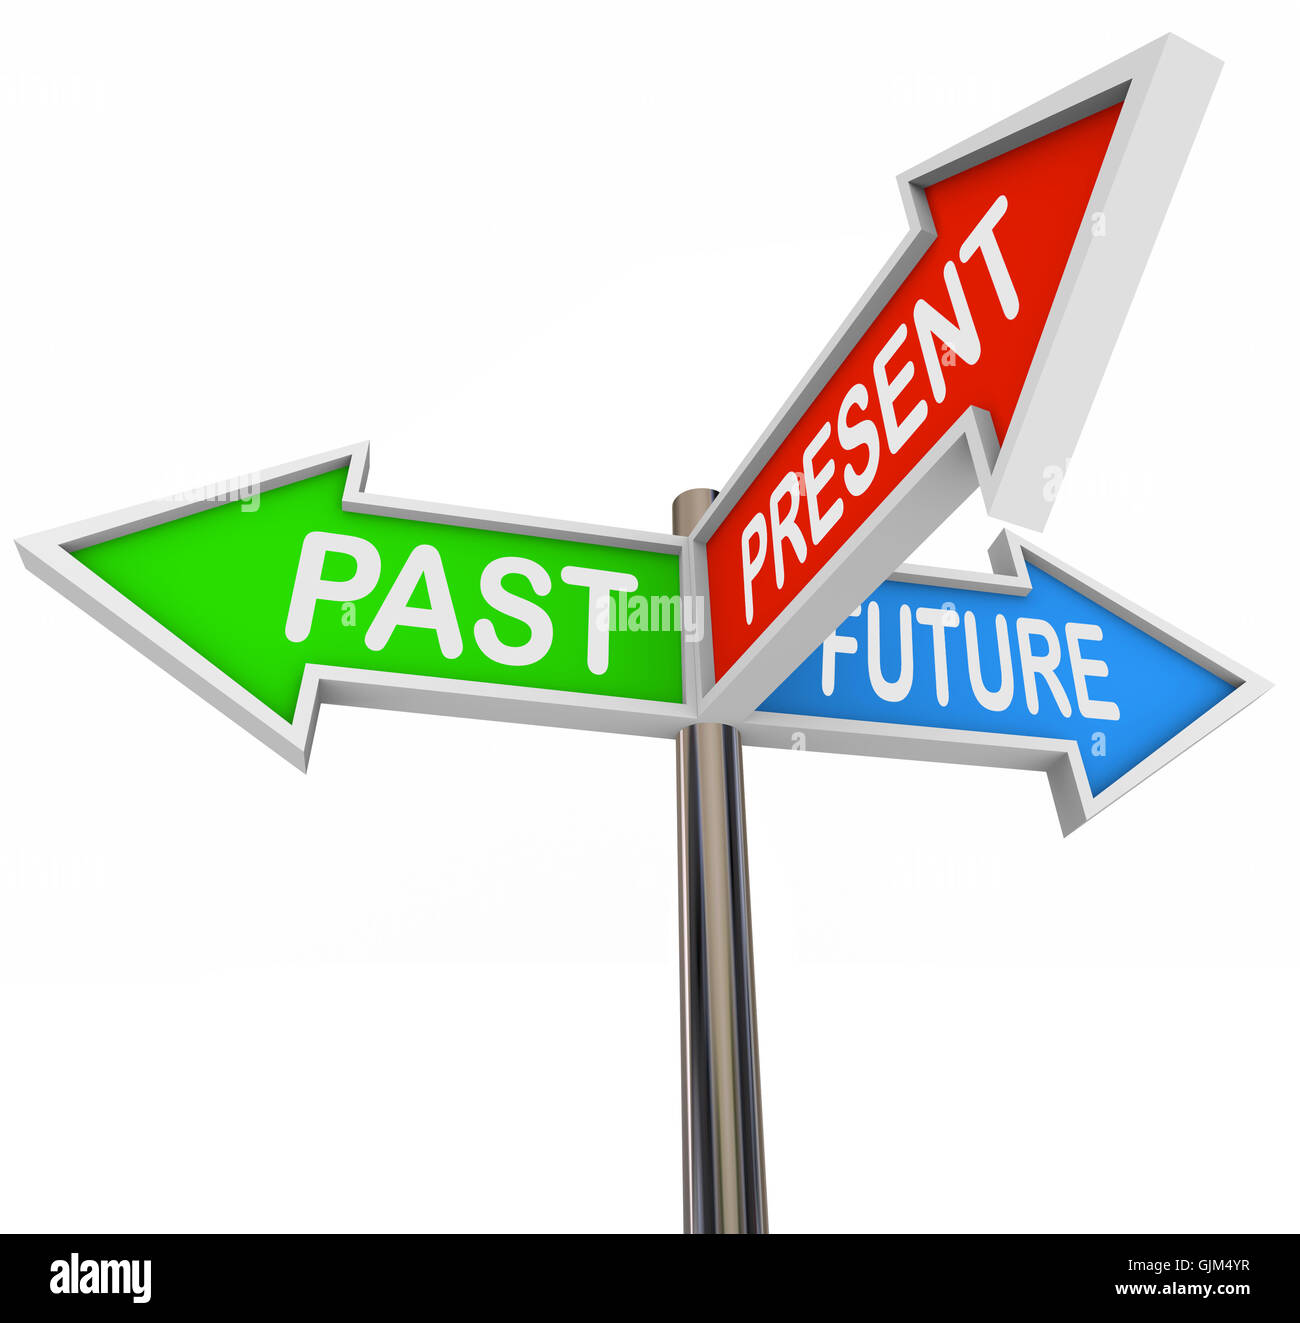 Past Present Future - 3 Colorful Arrow Signs Stock Photo - Alamy